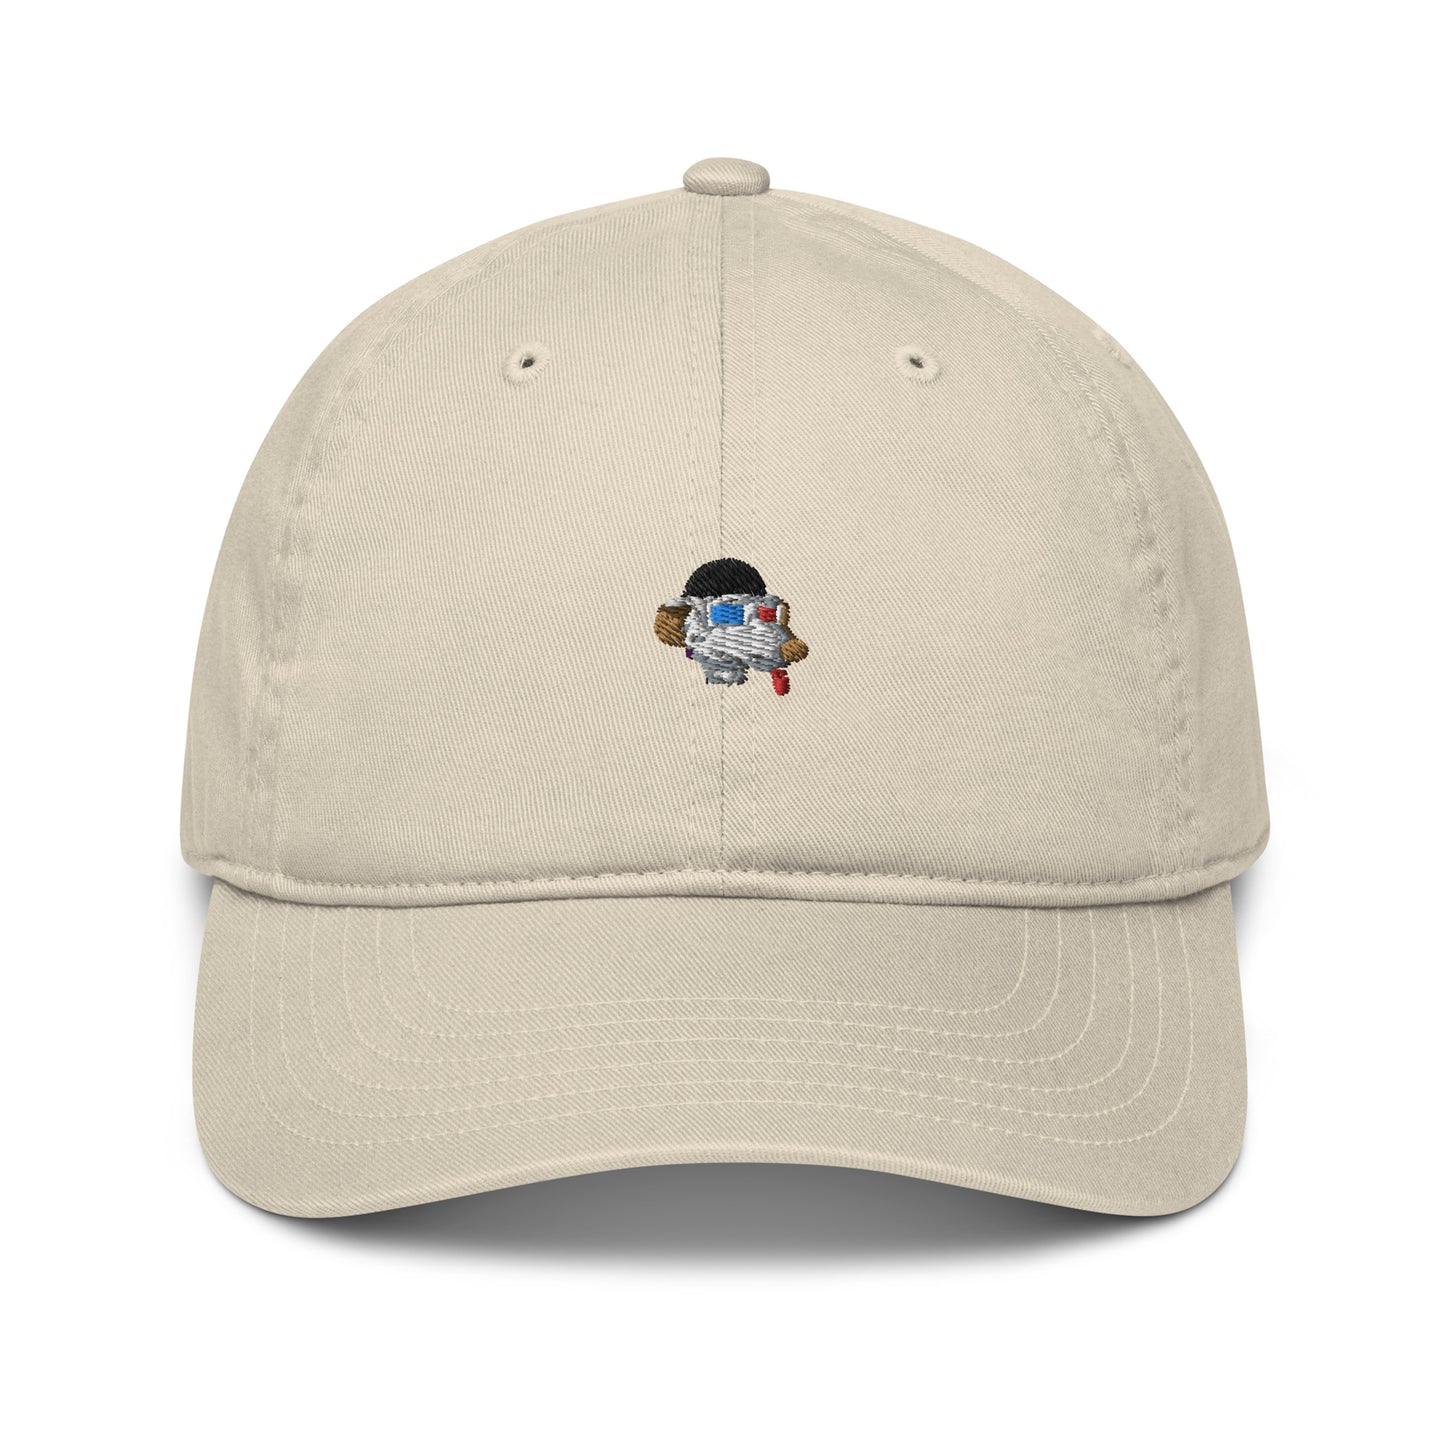 Organic dad hat feat Fat Rat #6058 (embroidered)